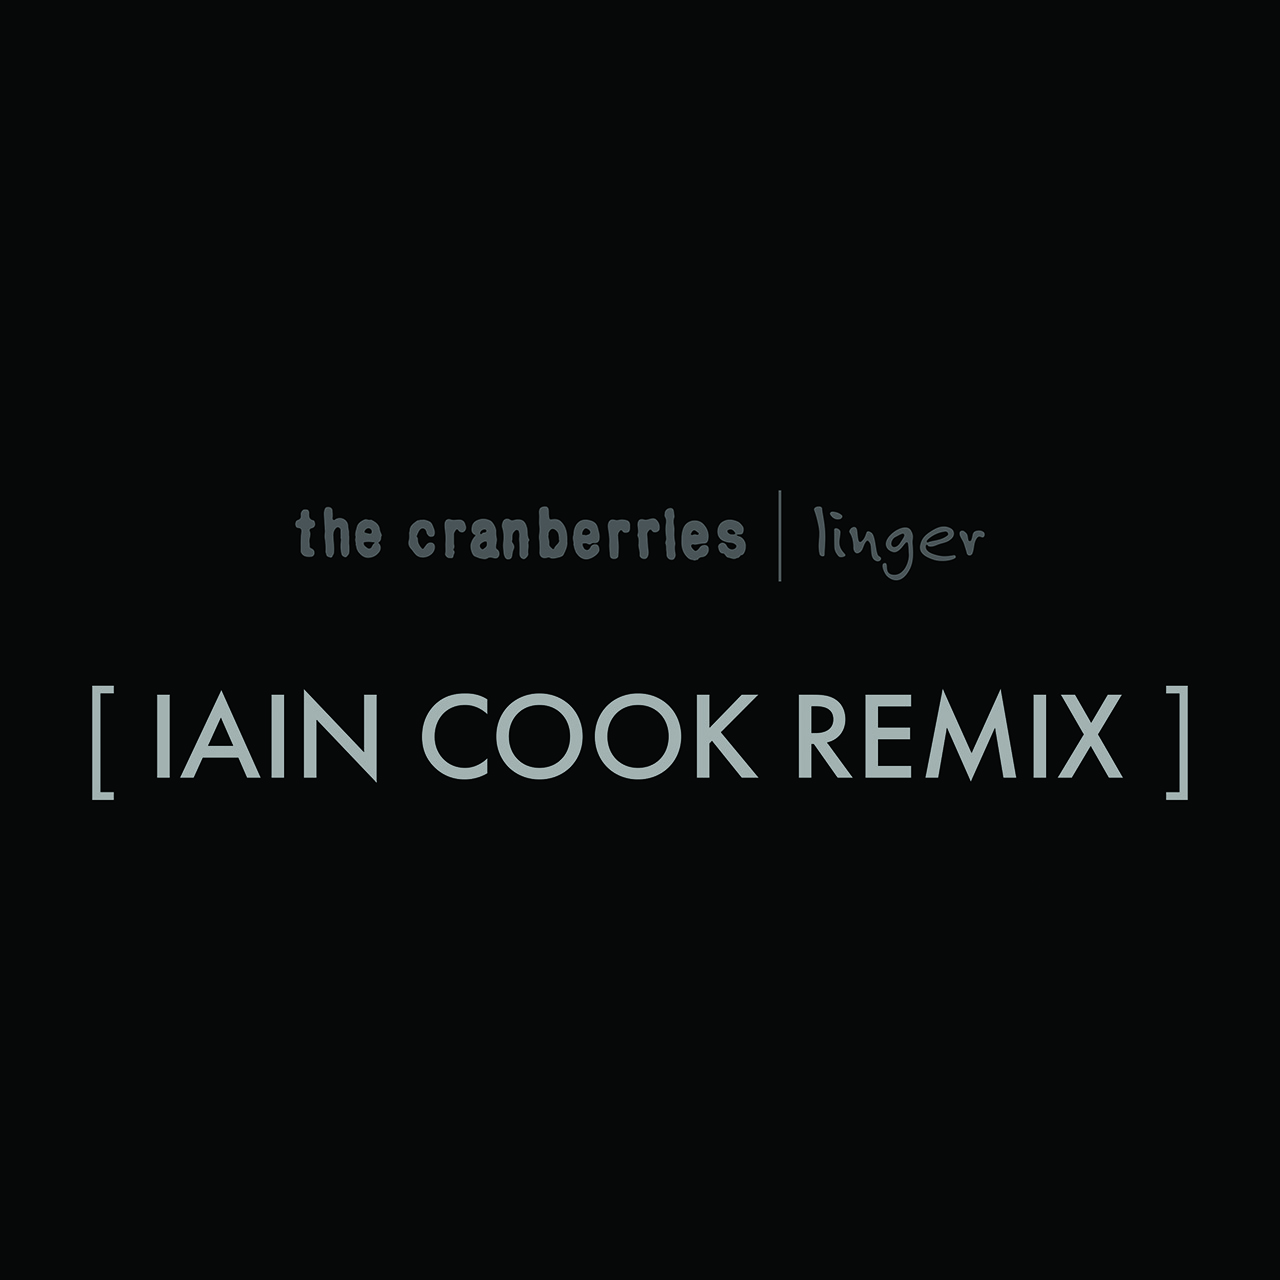 The Cranberries and CHVRCHES’ Iain Cook Share ‘Linger’ Remix